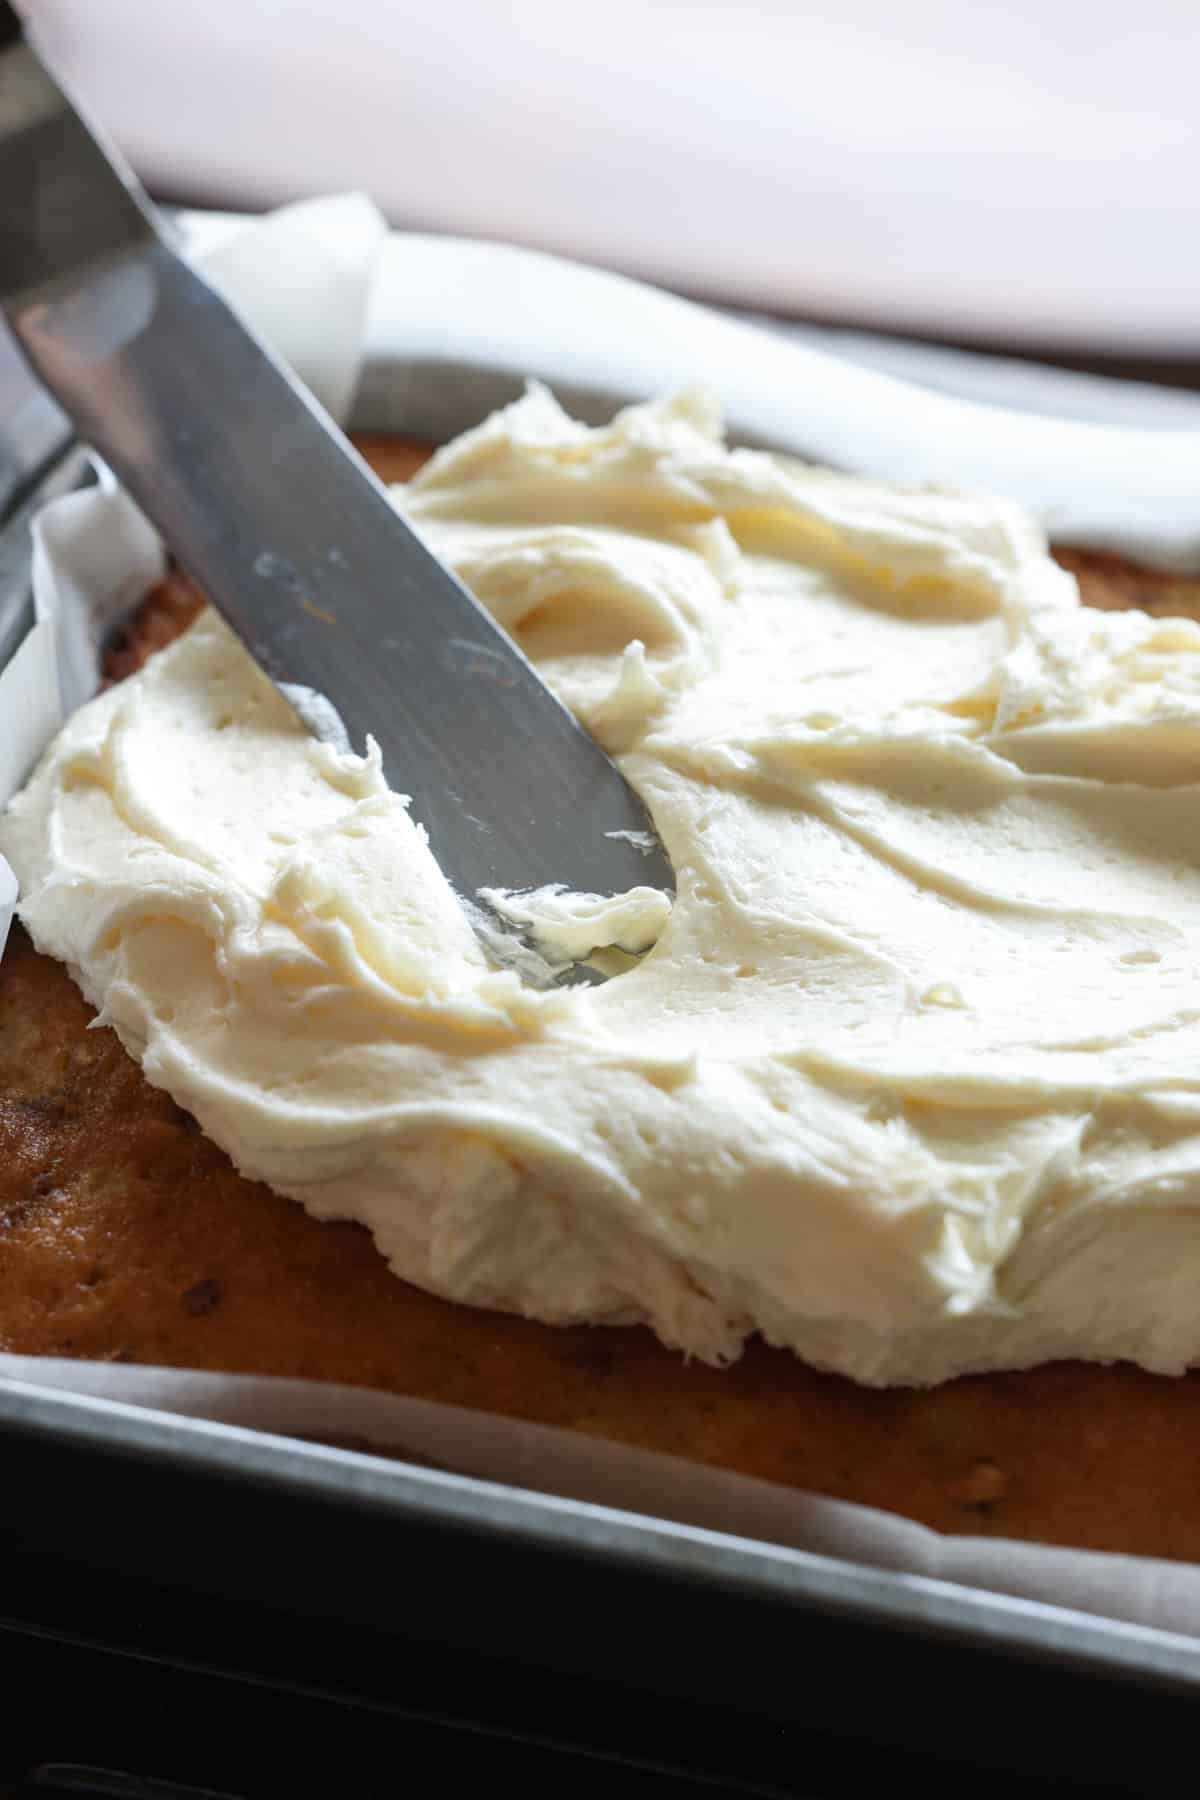 Spreading cream cheese icing onto a cake with an offset spatula